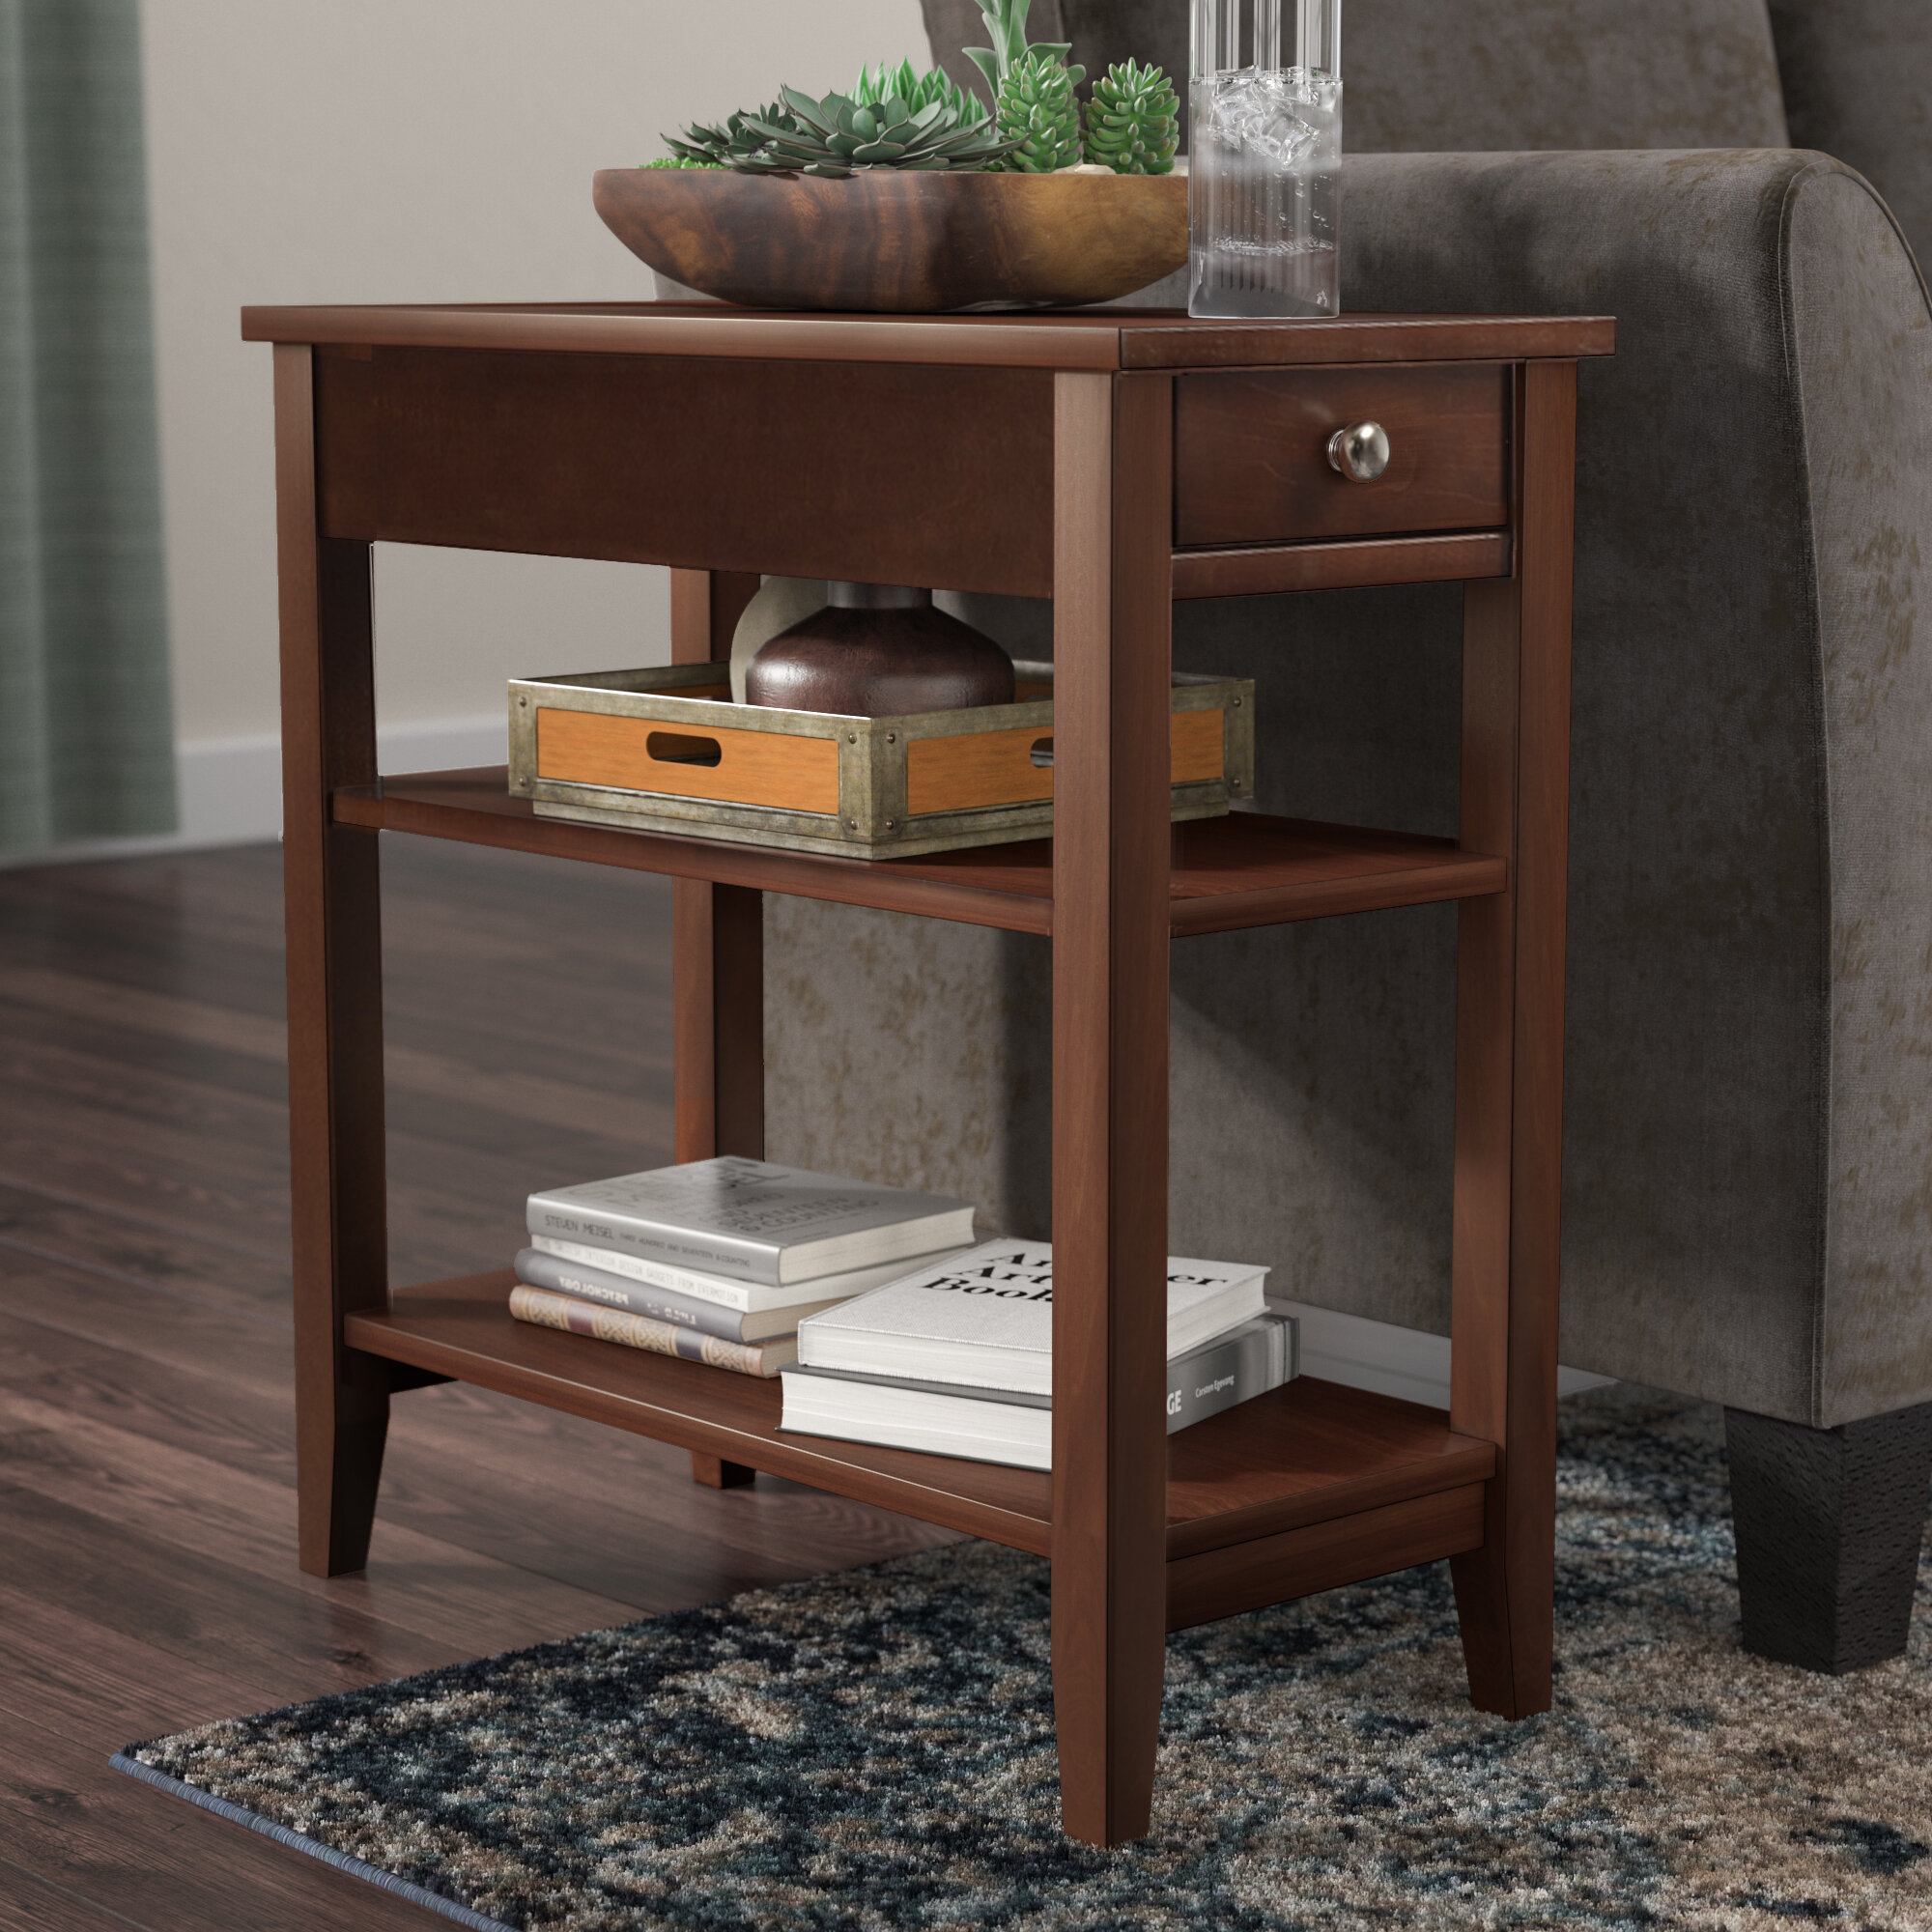 End Table with Birch Veneer and Storage